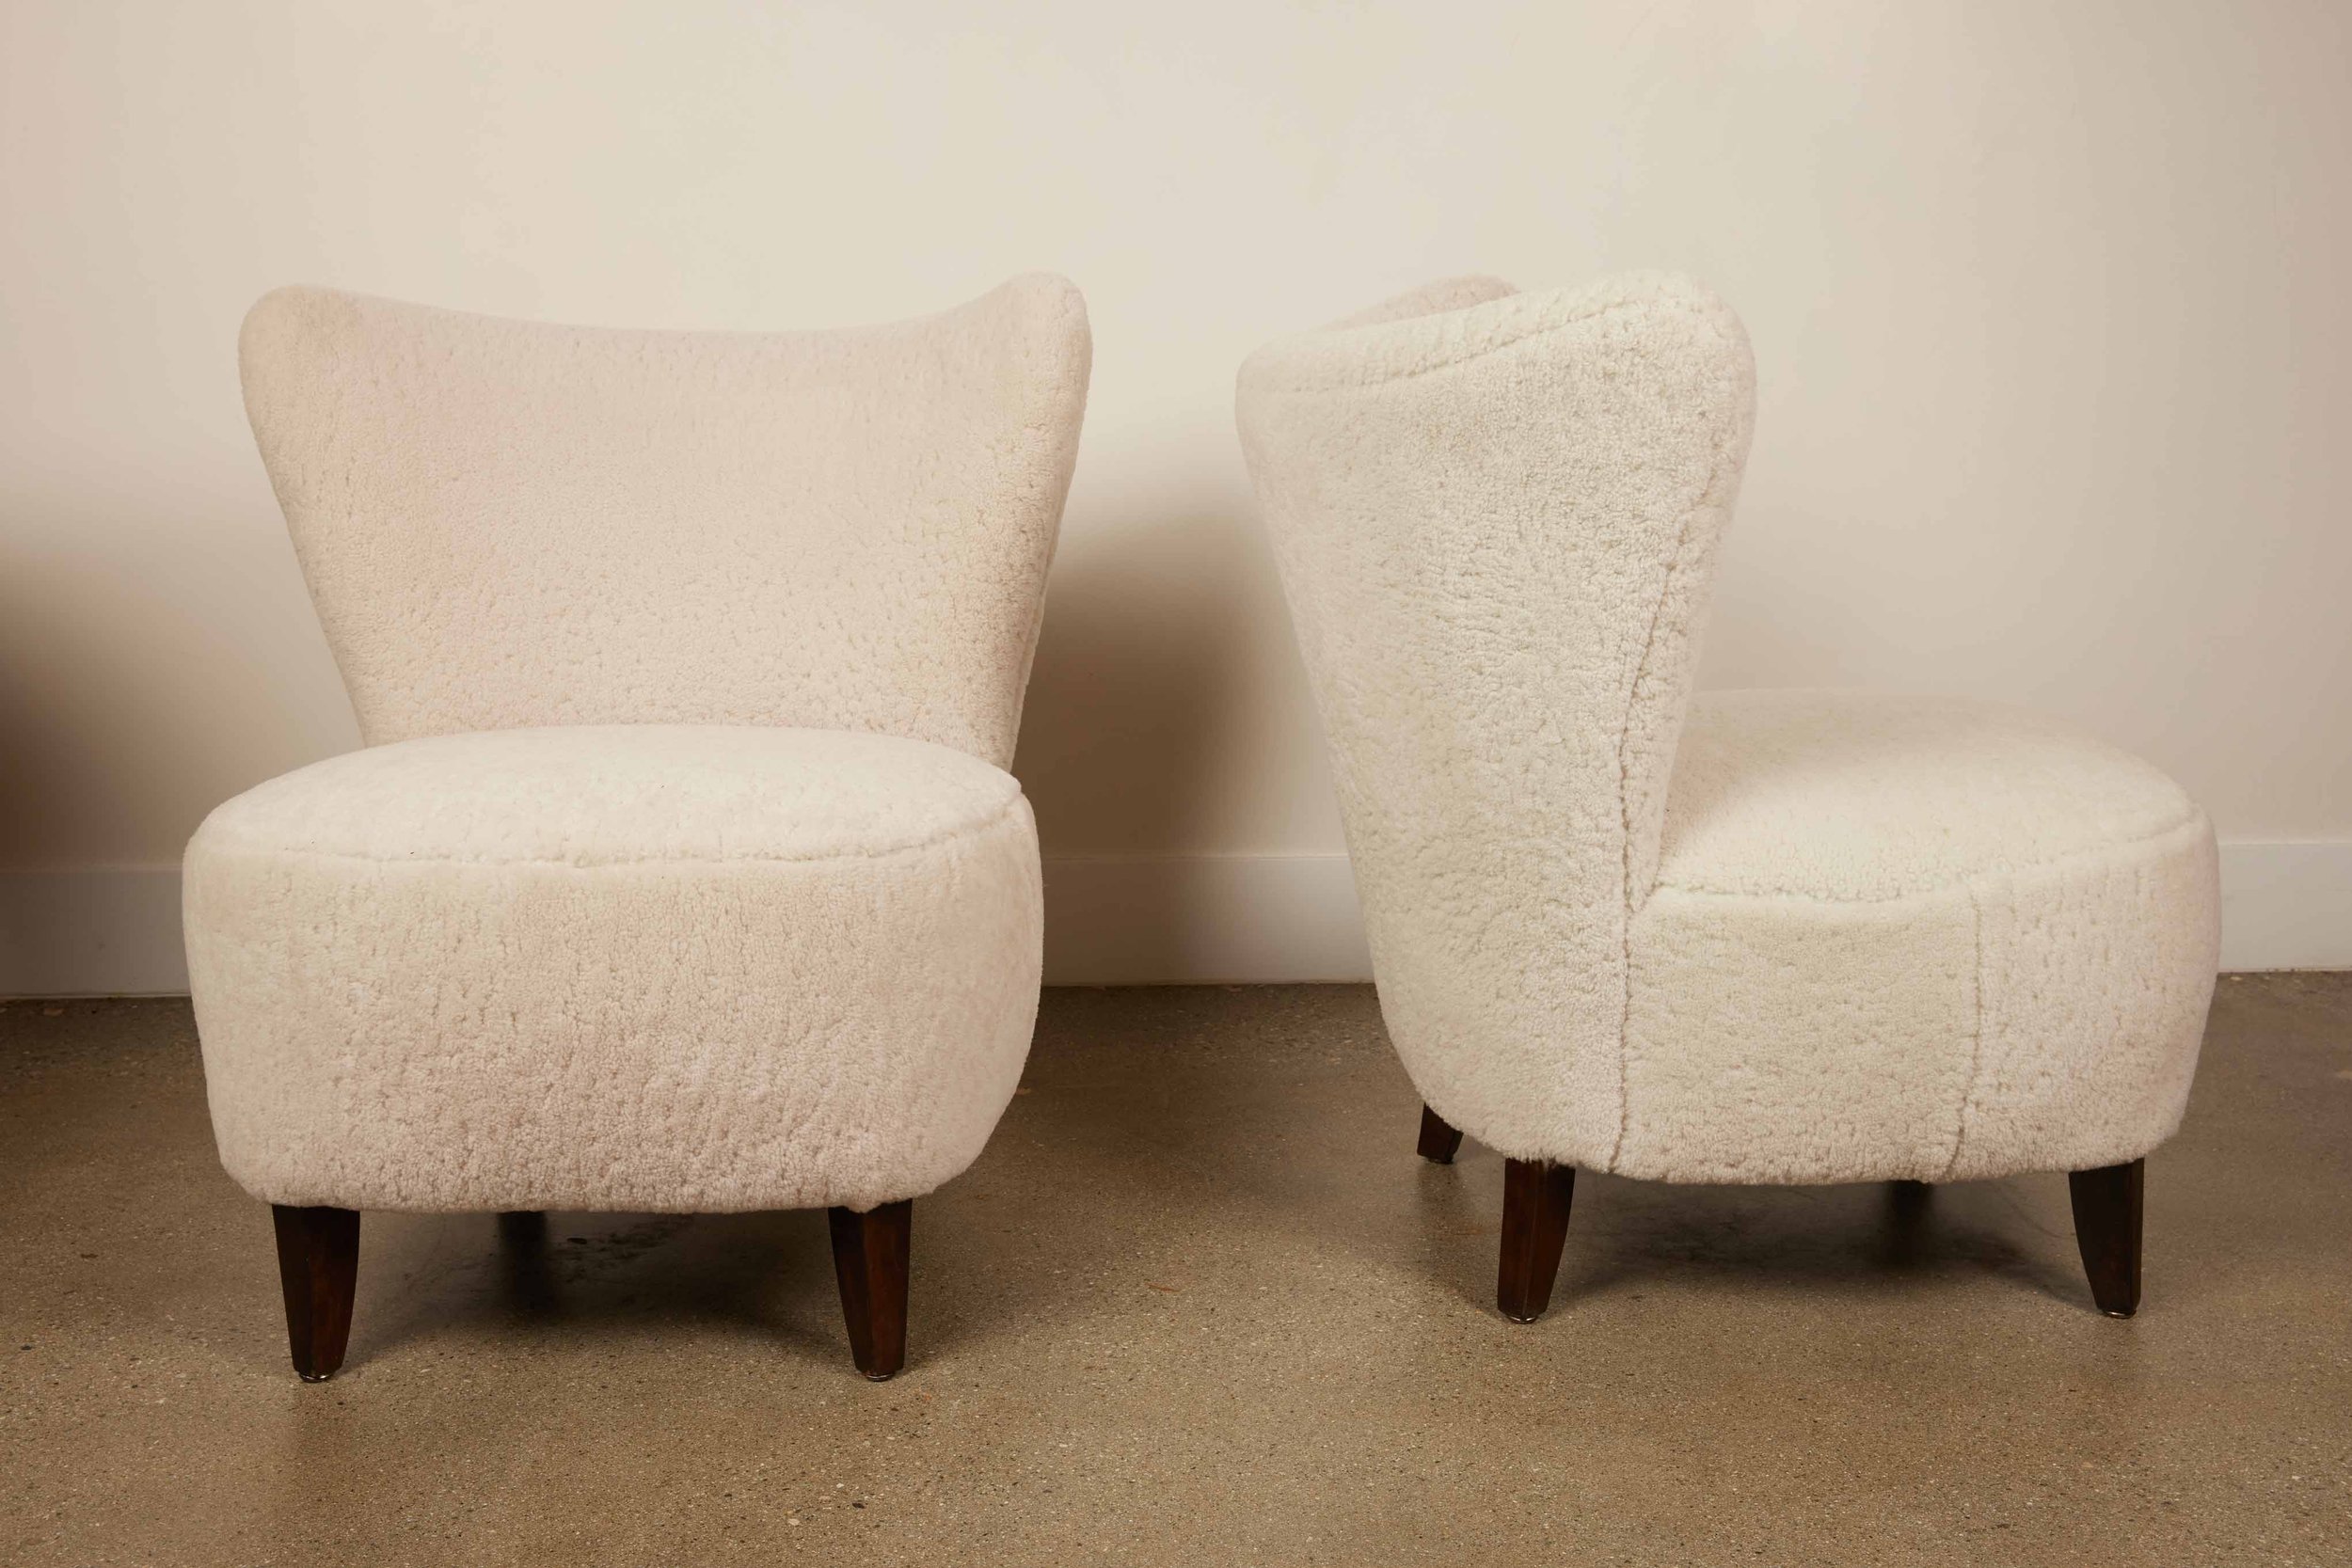 Janette-Mallory-Interior-Design-Shop-Mid-Century-Shearling-Chairs-Side.jpg